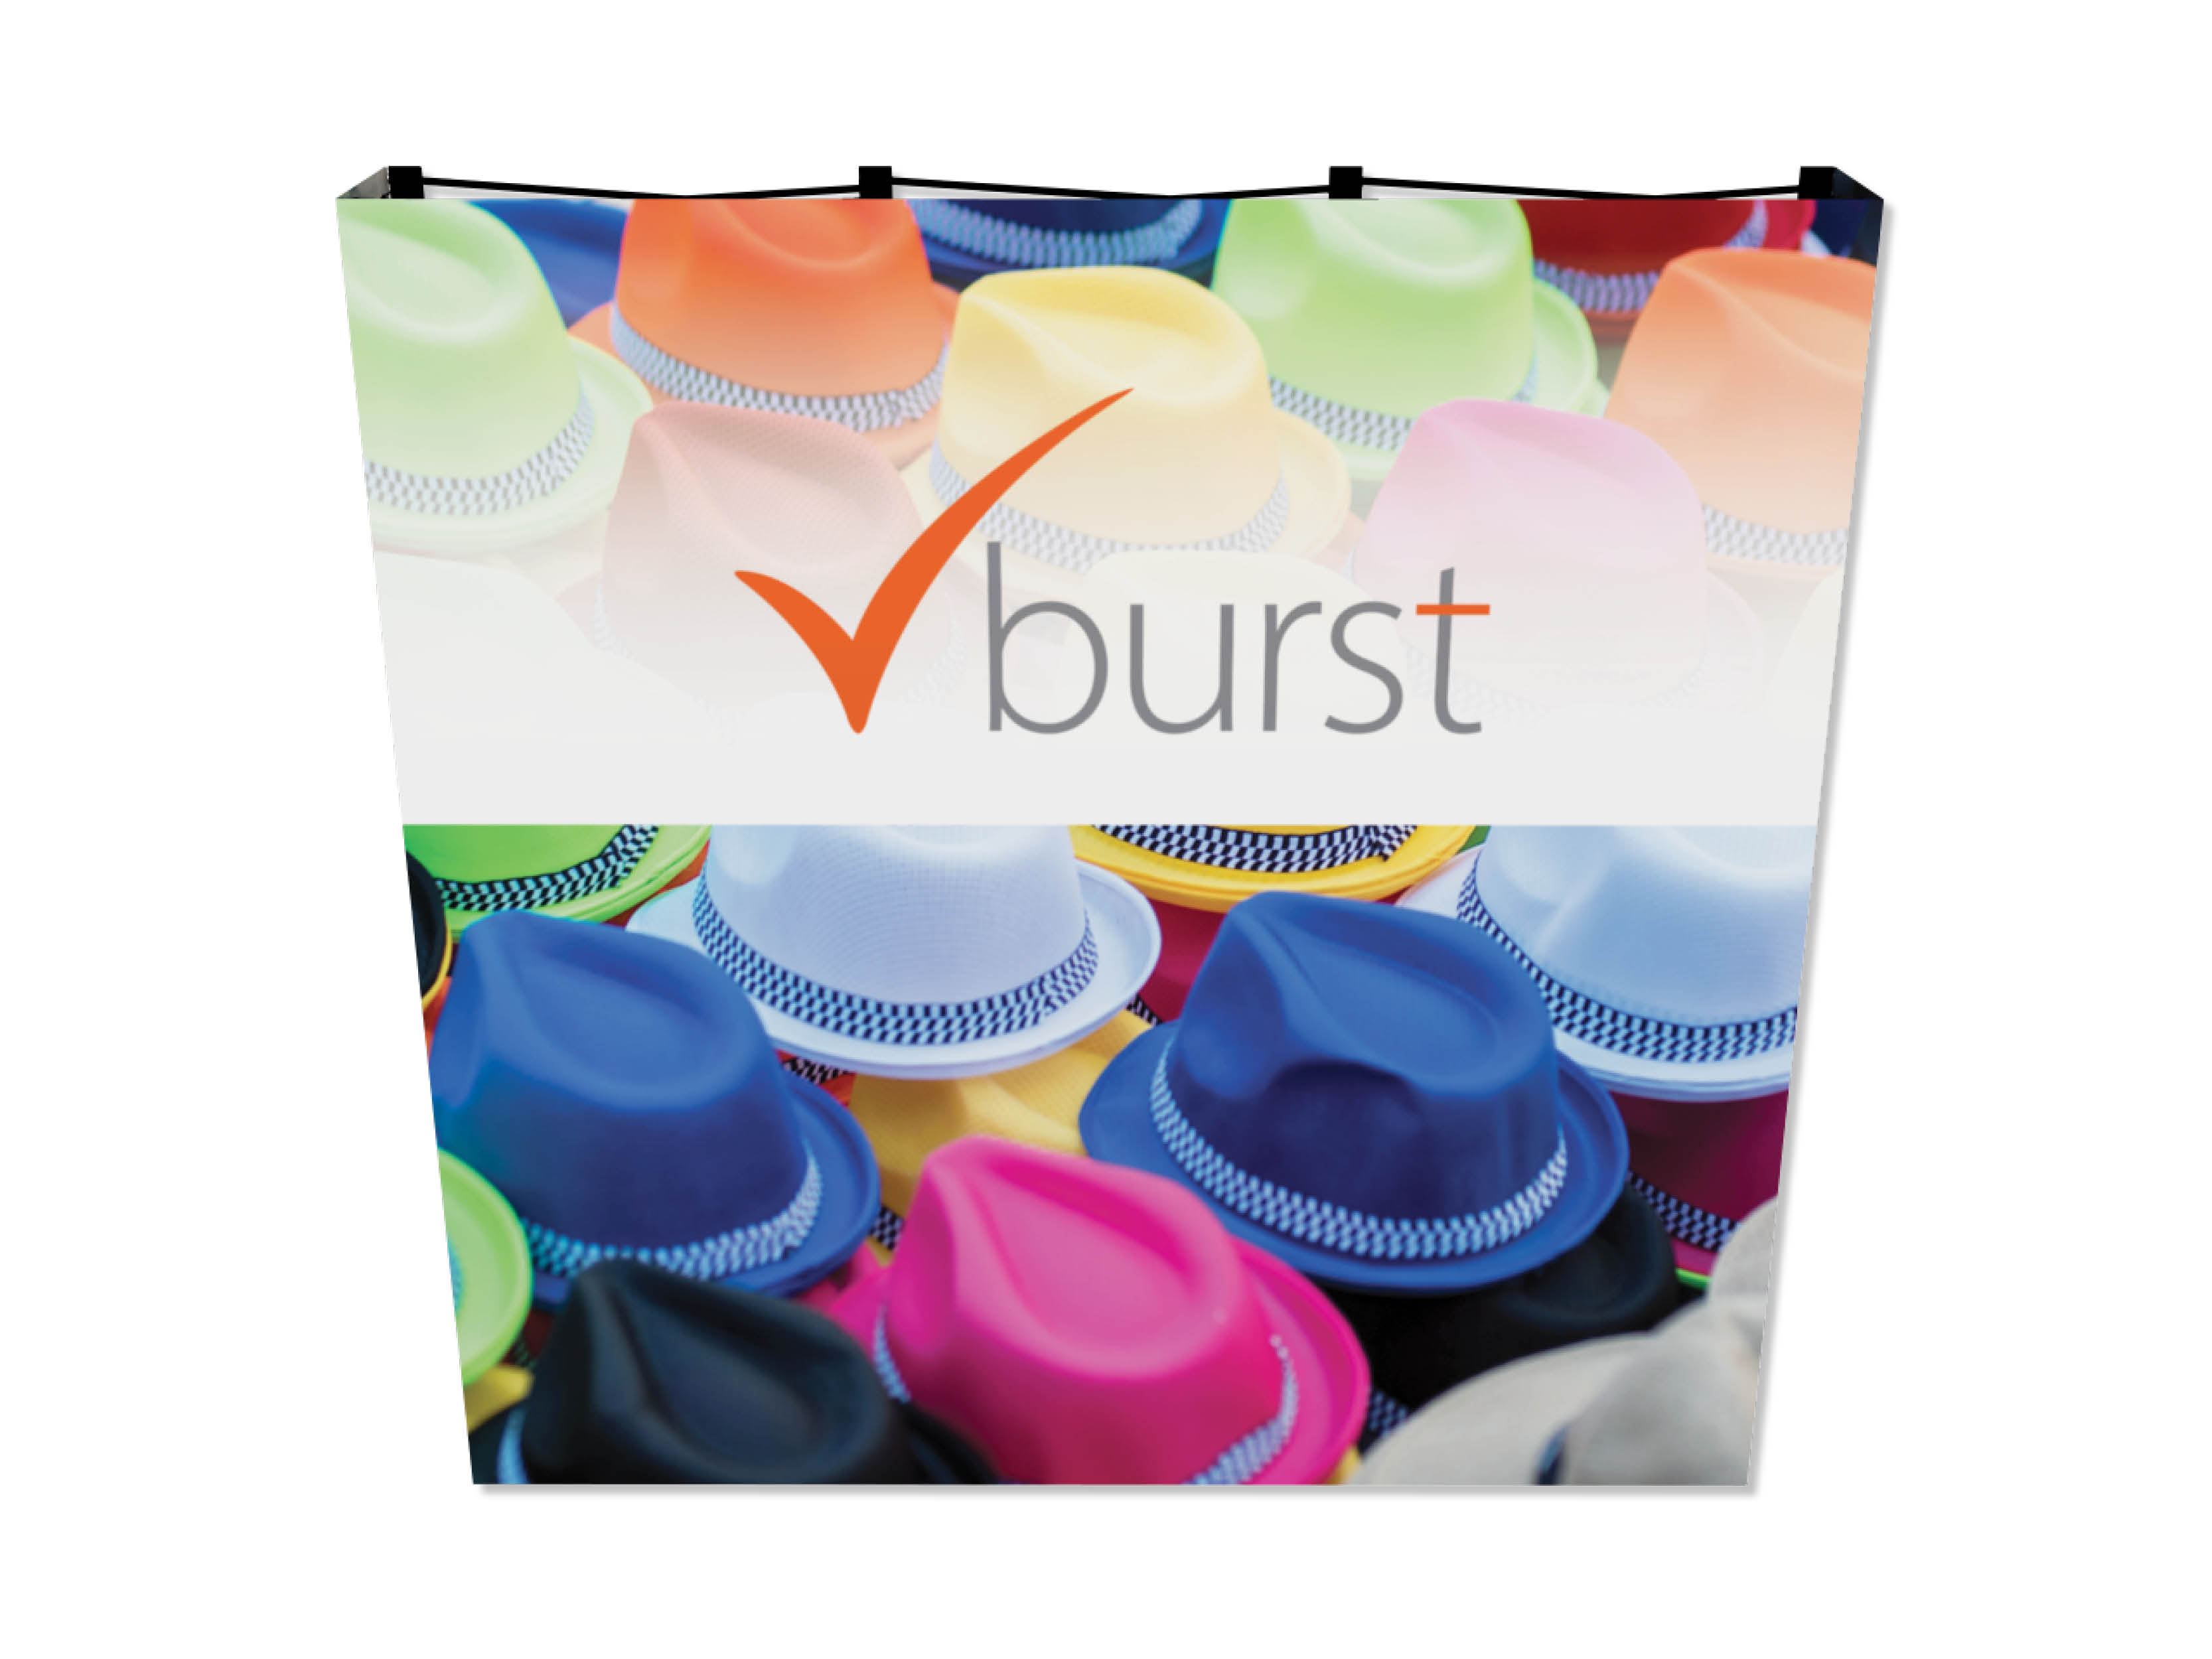 V-Burst 8' Flat Fabric Pop-up with end caps